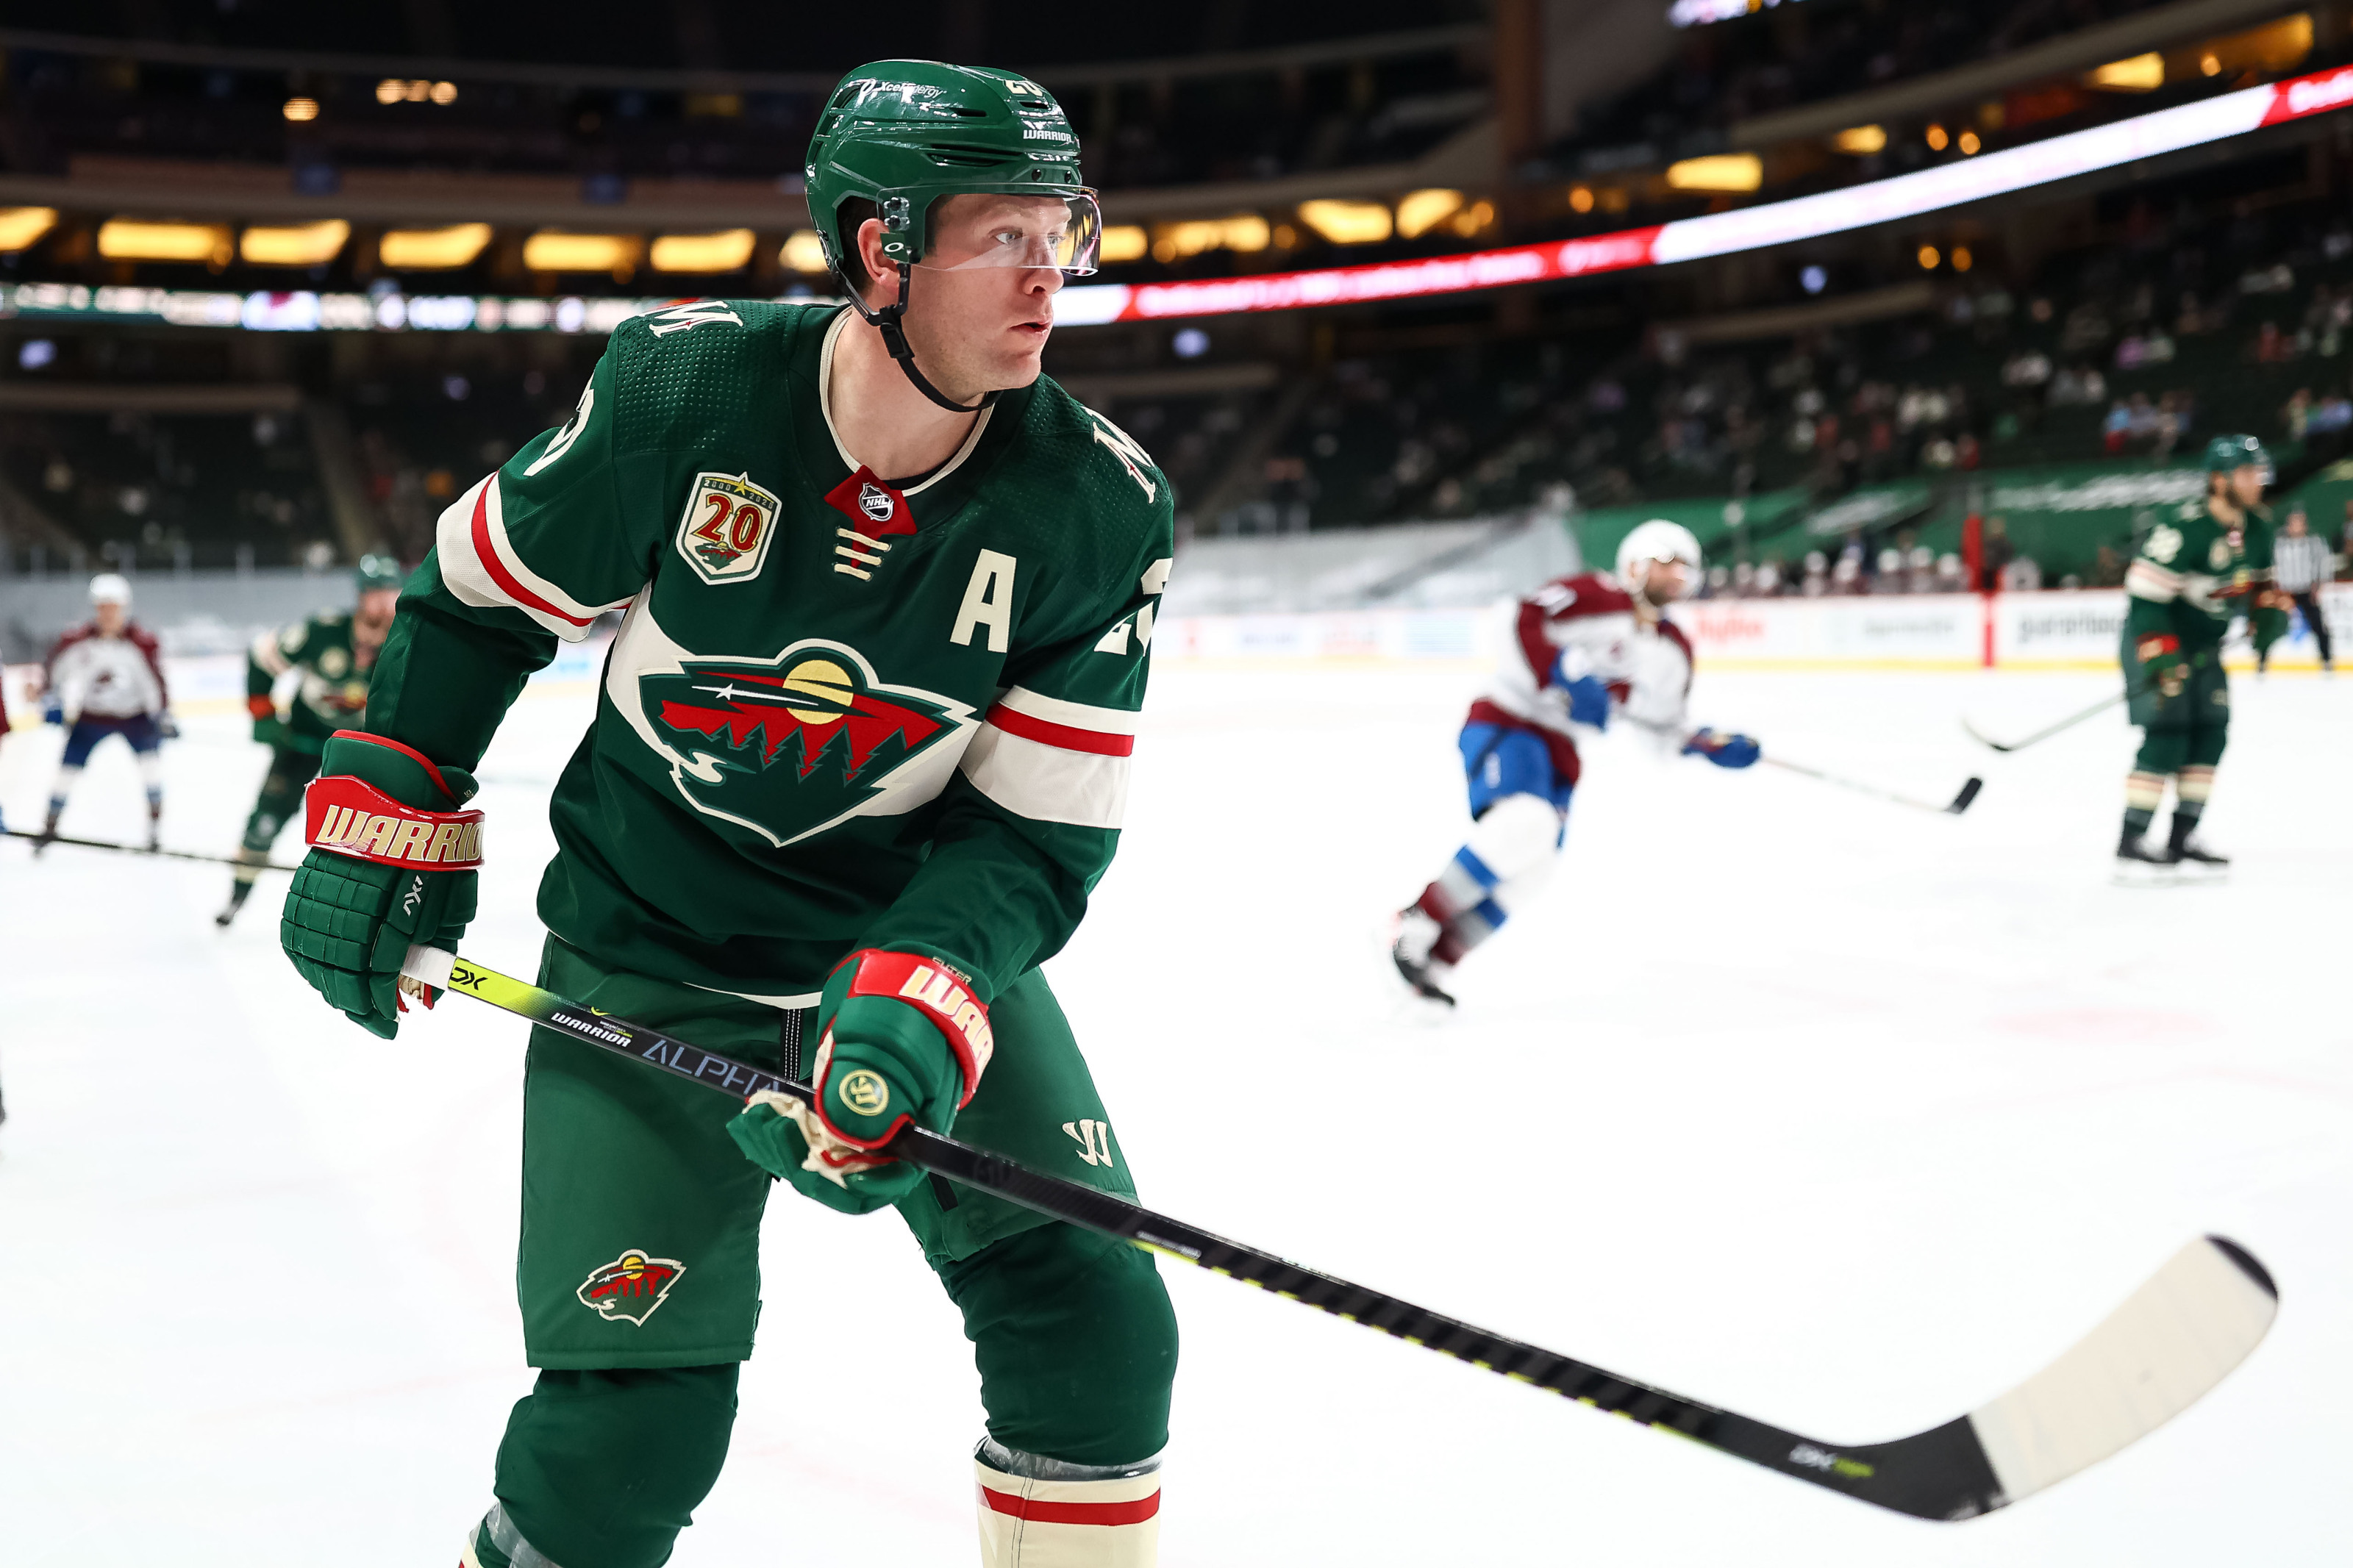 Stars defenseman Ryan Suter looking to refocus on hockey after  disappointing return to Minnesota